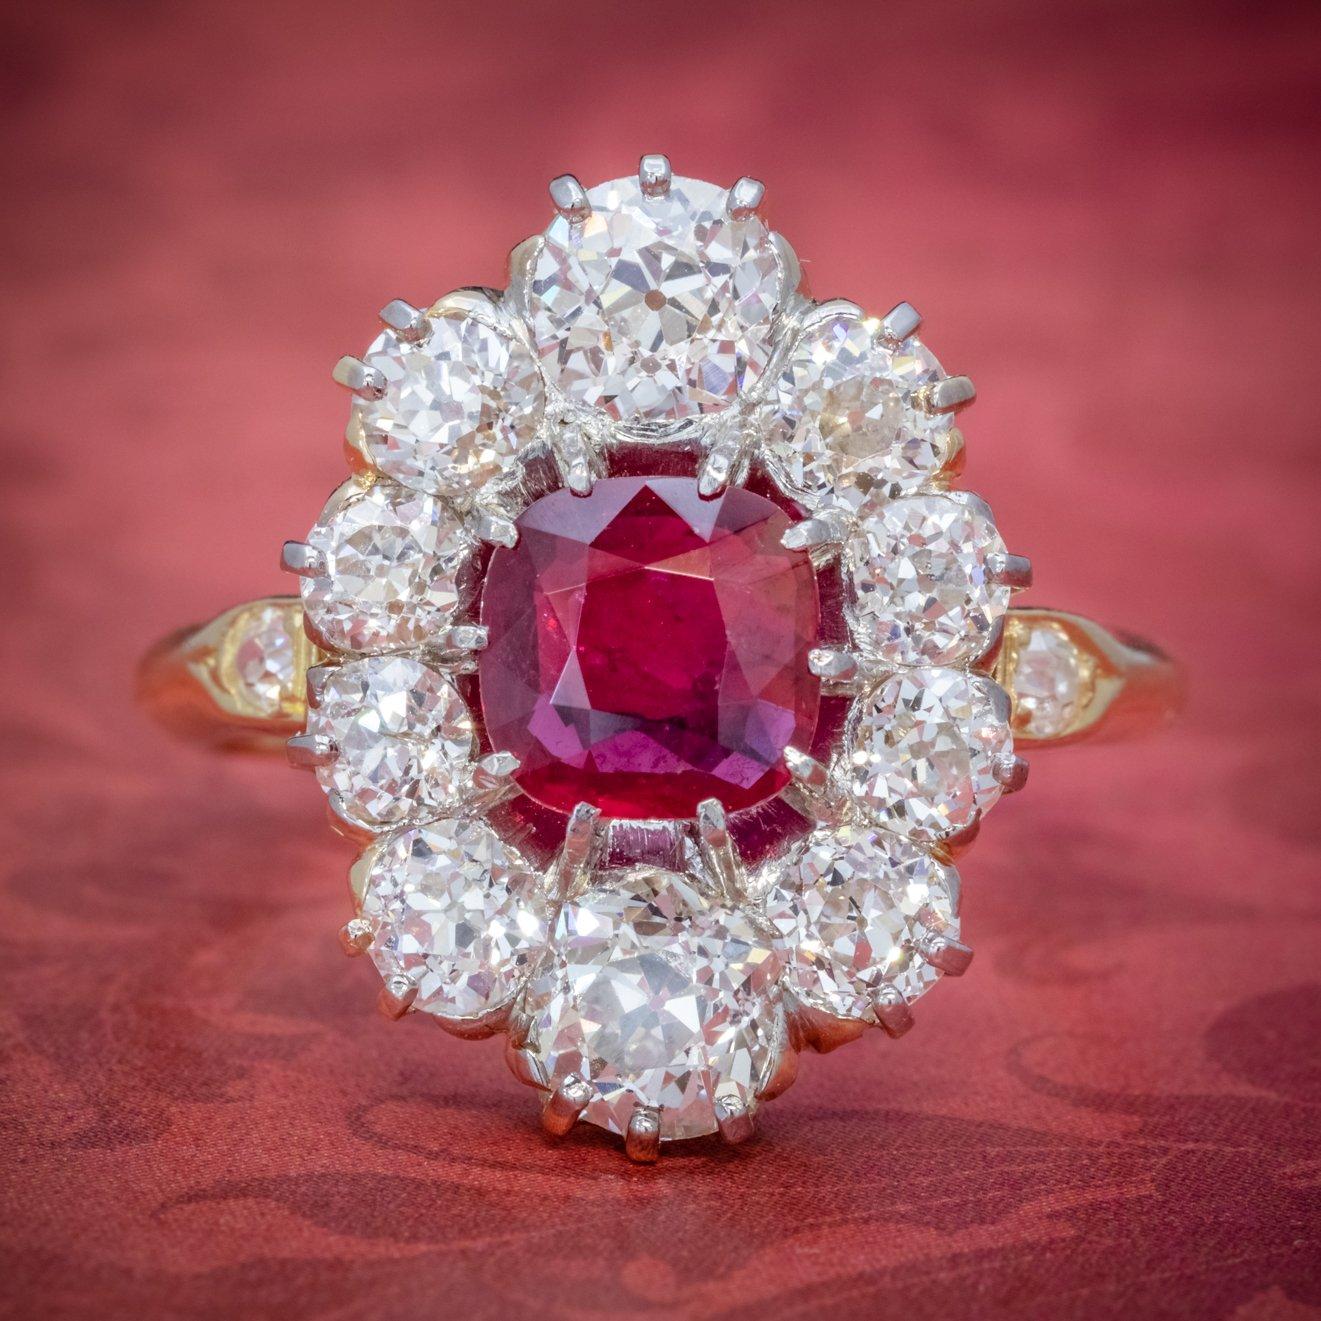 A spectacular antique Edwardian cluster ring from the early 1900s adorned with a cherry-pink cushion cut ruby at its heart complete with two gem certifications that verify the stone is natural and weighs an estimated 1.15ct with a spread of approx.